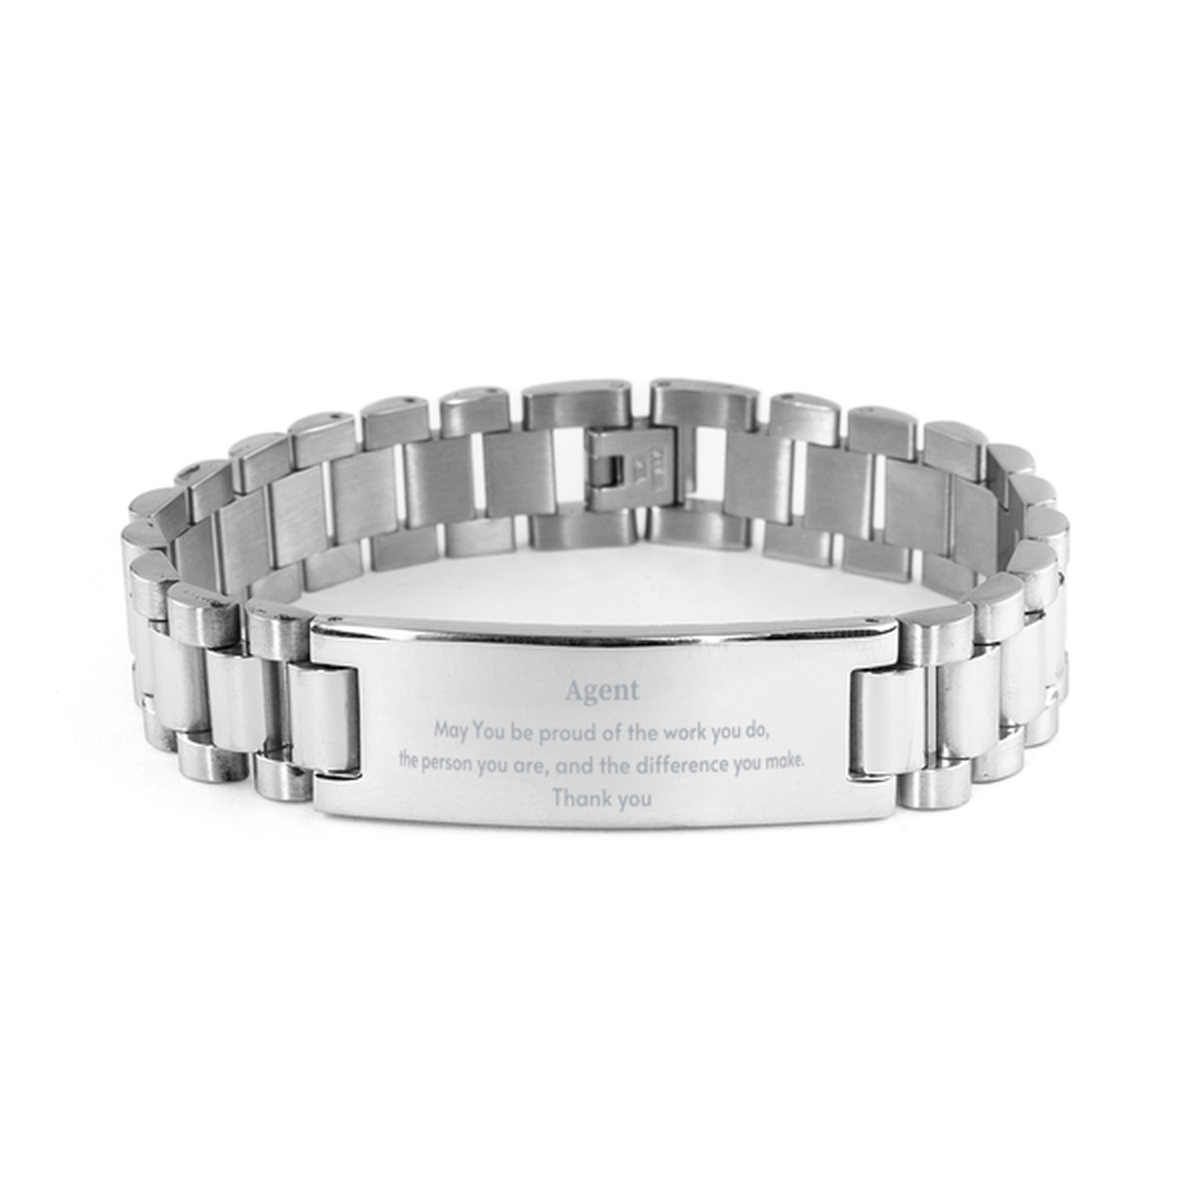 Heartwarming Ladder Stainless Steel Bracelet Retirement Coworkers Gifts for Agent, Agent May You be proud of the work you do, the person you are Gifts for Boss Men Women Friends